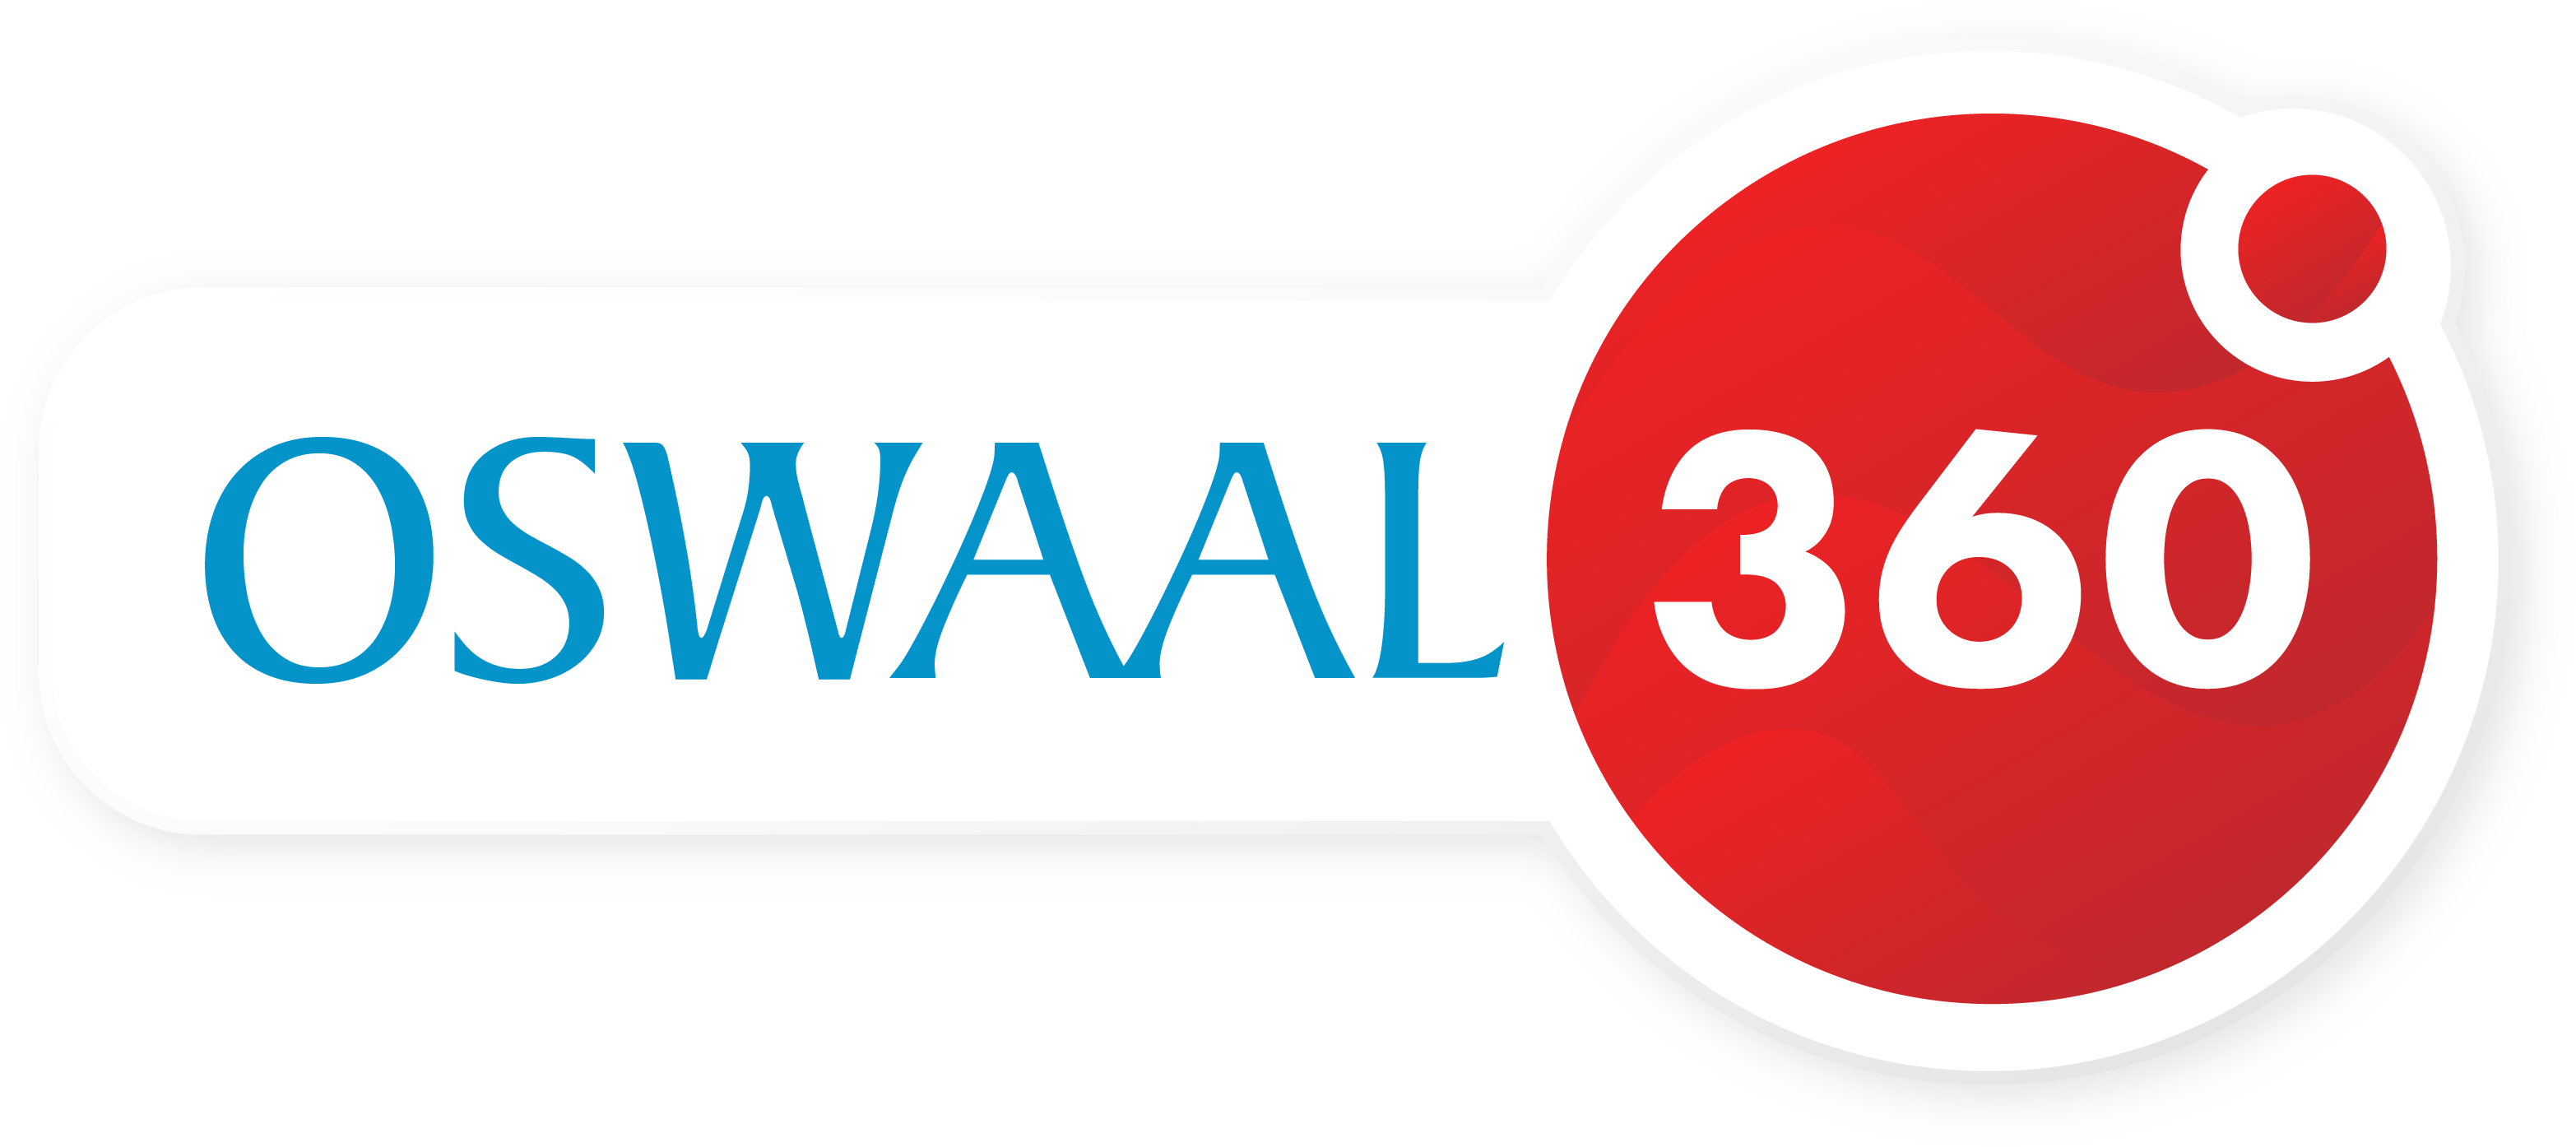 Oswaal 360: Discover and Learn: Illuminate CBSE Classes 1-5 Pathways